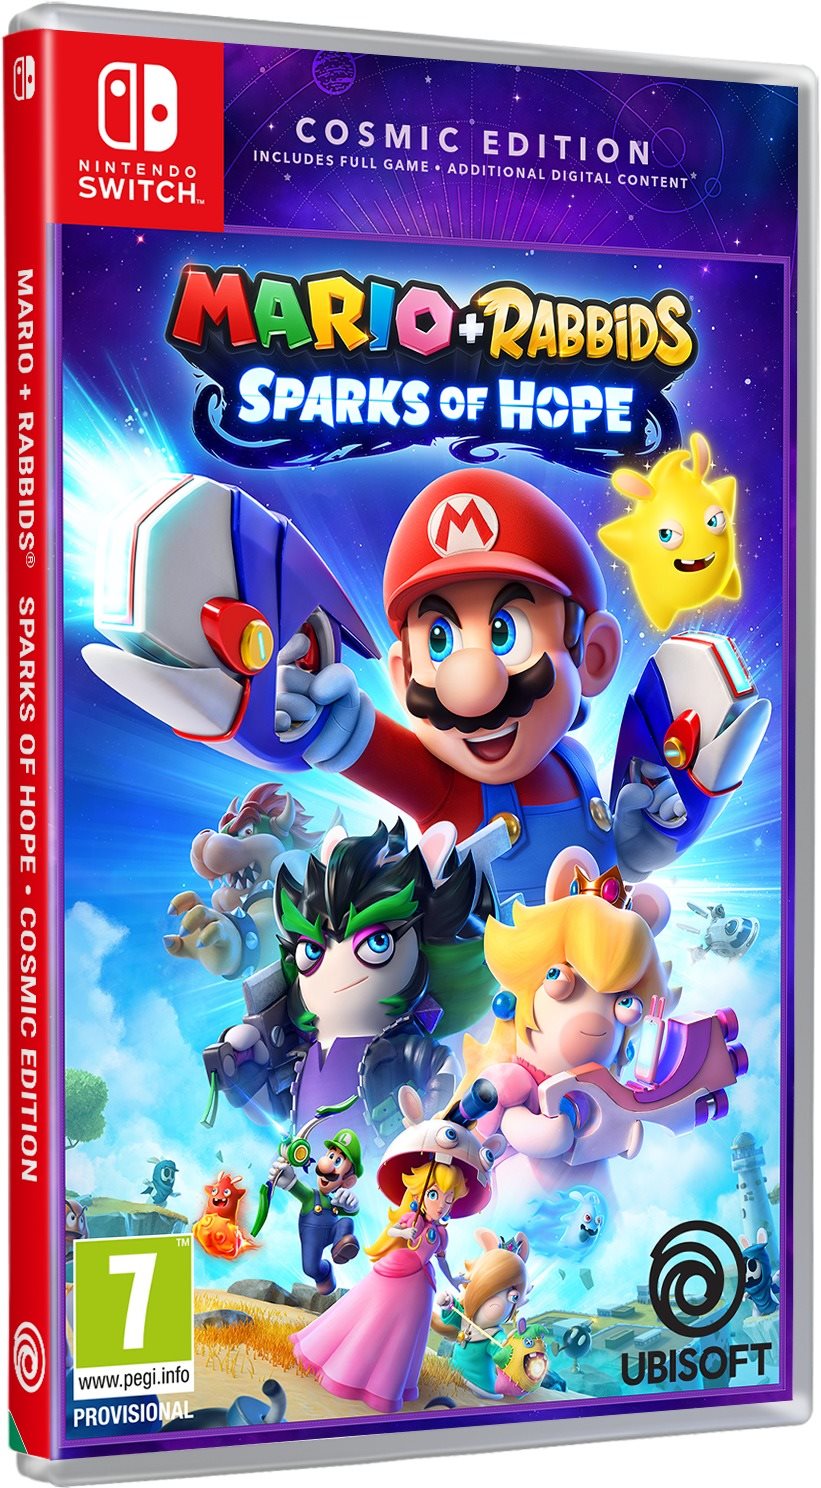 Mario + Rabbids Sparks of Hope: Cosmic Edition - Nintendo Switch